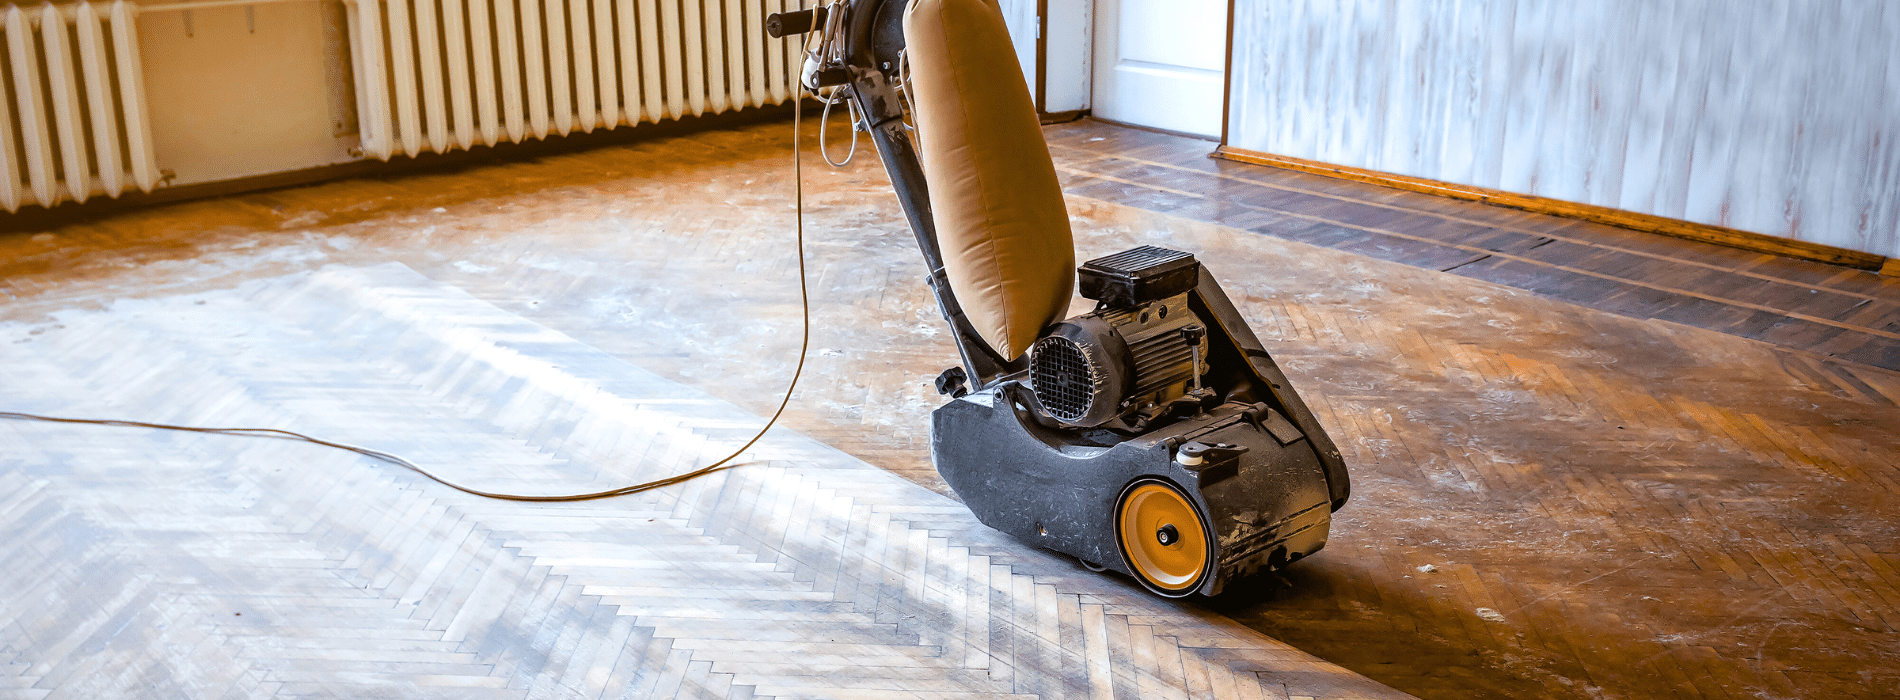 Bona Scorpion drum sander (200mm) with 1.5kW power, operating at 240V and 50Hz frequency, connected to a dust extraction system featuring a HEPA filter, ensuring a pristine and effective sanding process for hardwood floors.